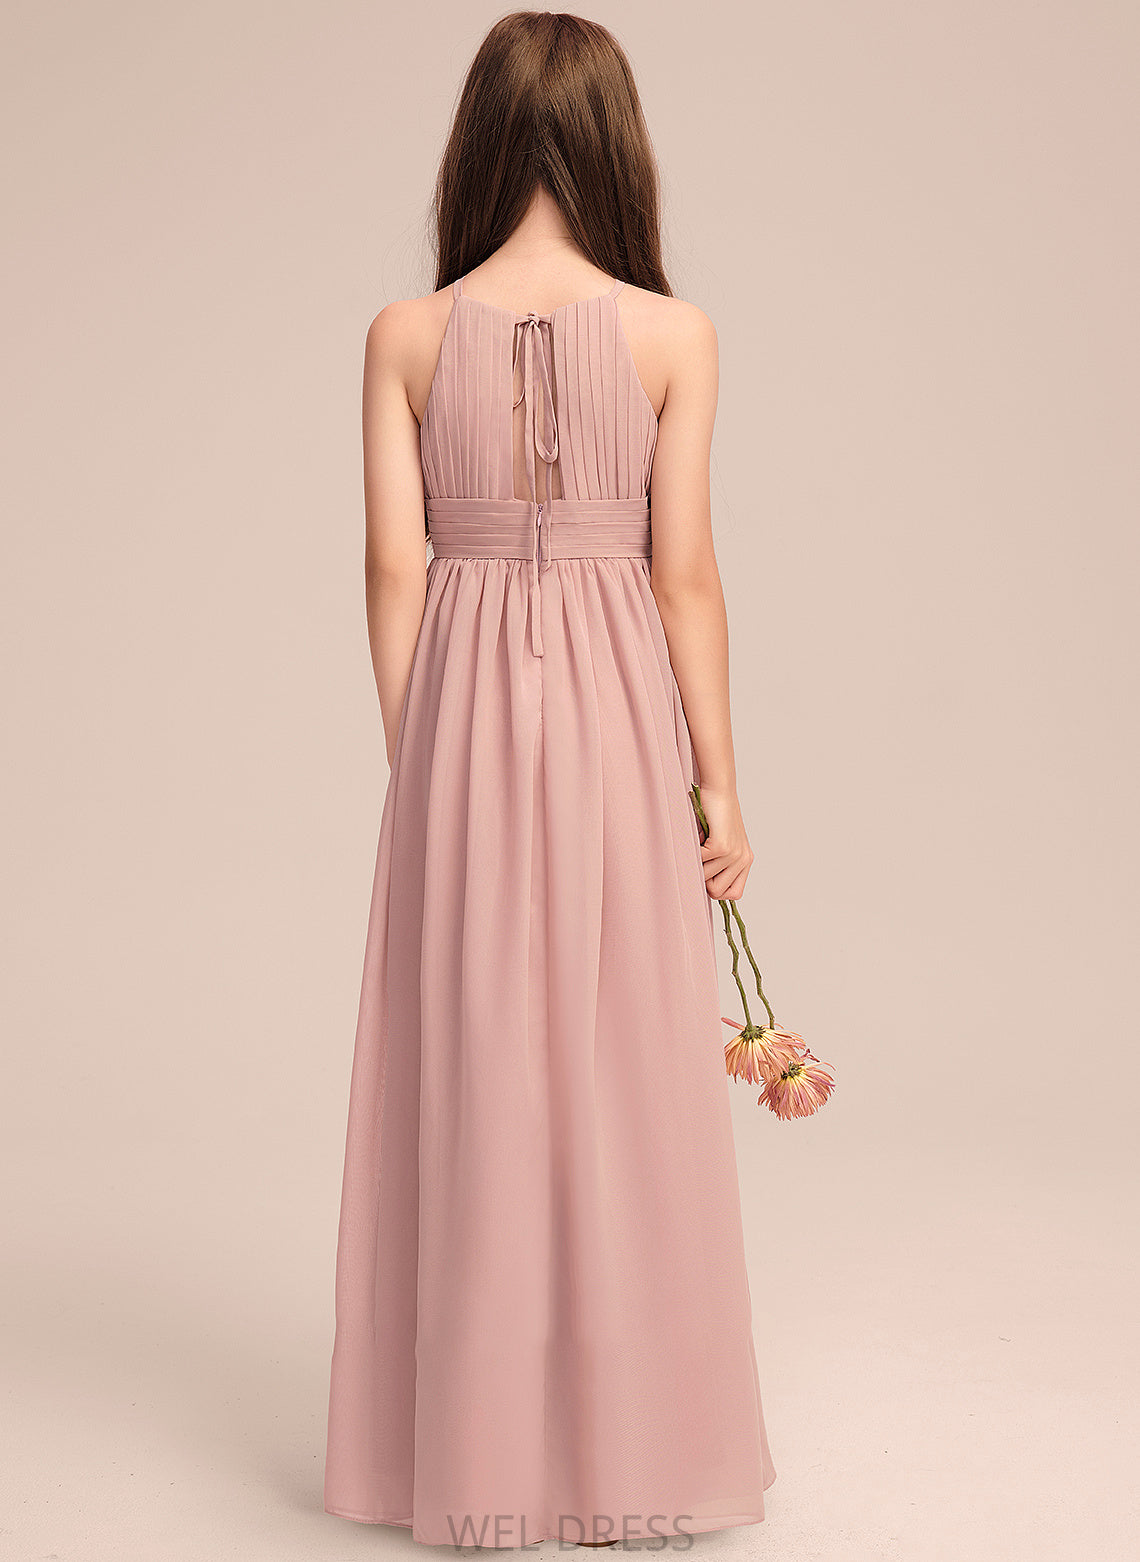 Scoop A-Line Junior Bridesmaid Dresses Neck Ruffle With Chiffon Willow Floor-Length